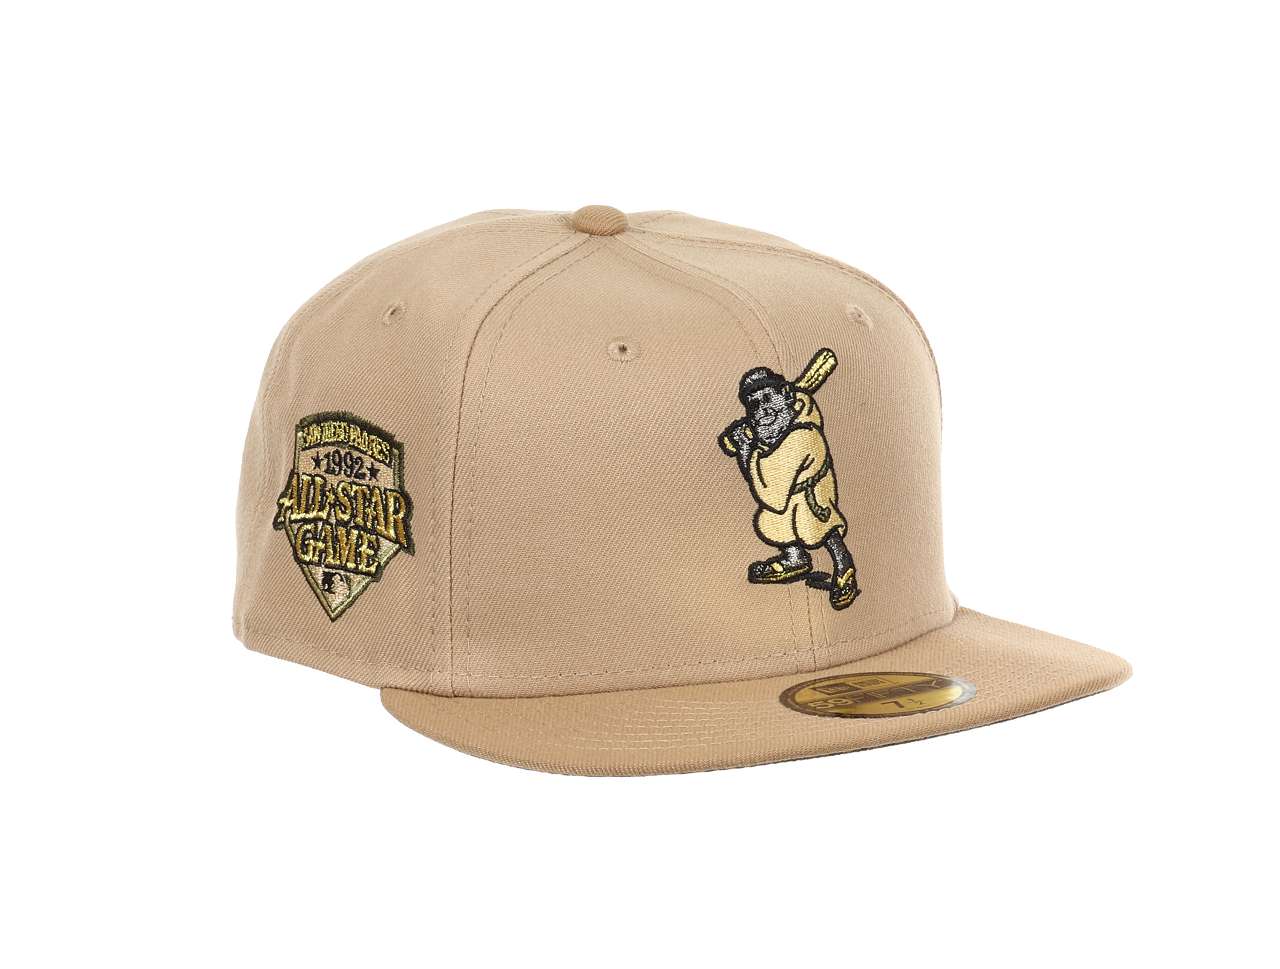 San Diego Padres MLB Cooperstown 1992 All Star Game Camel 59Fifty Basecap New Era